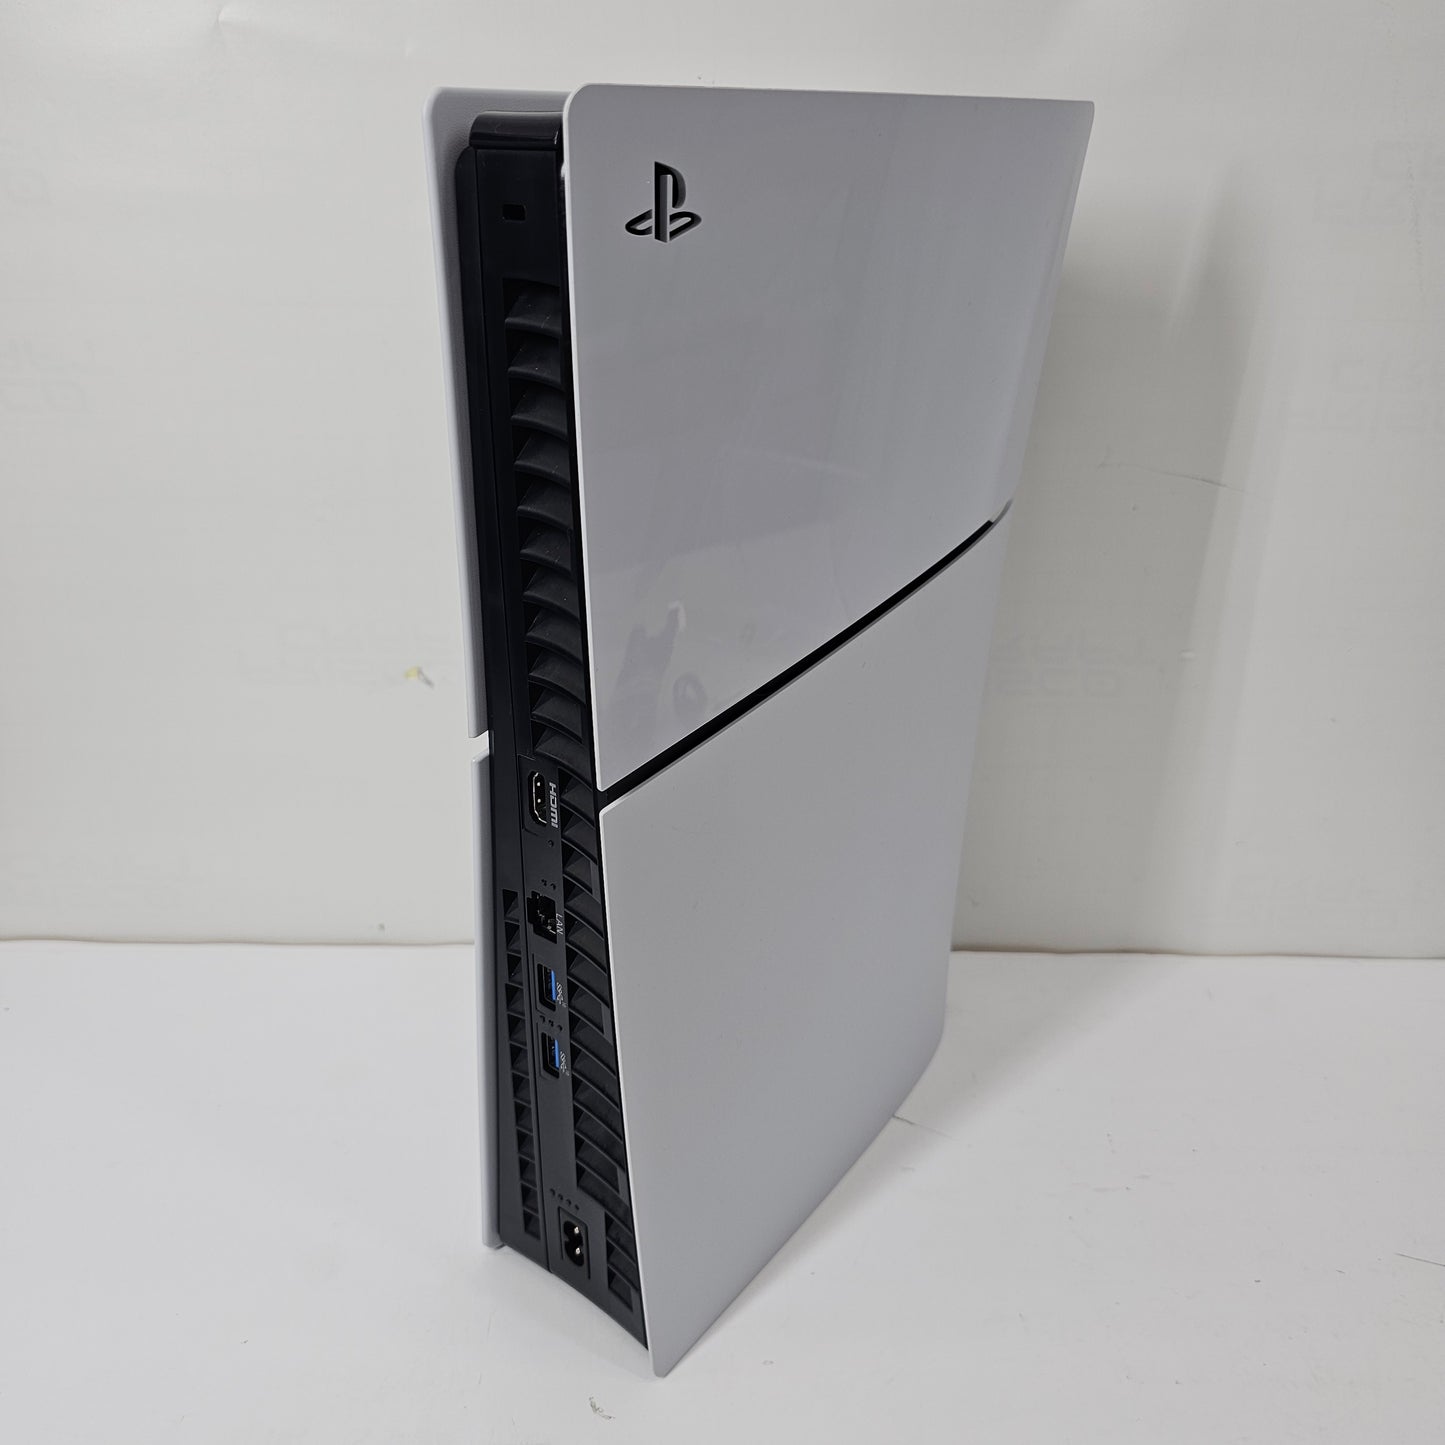 Sony PlayStation 5 Slim Disc Edition PS5 1TB White Console Gaming System